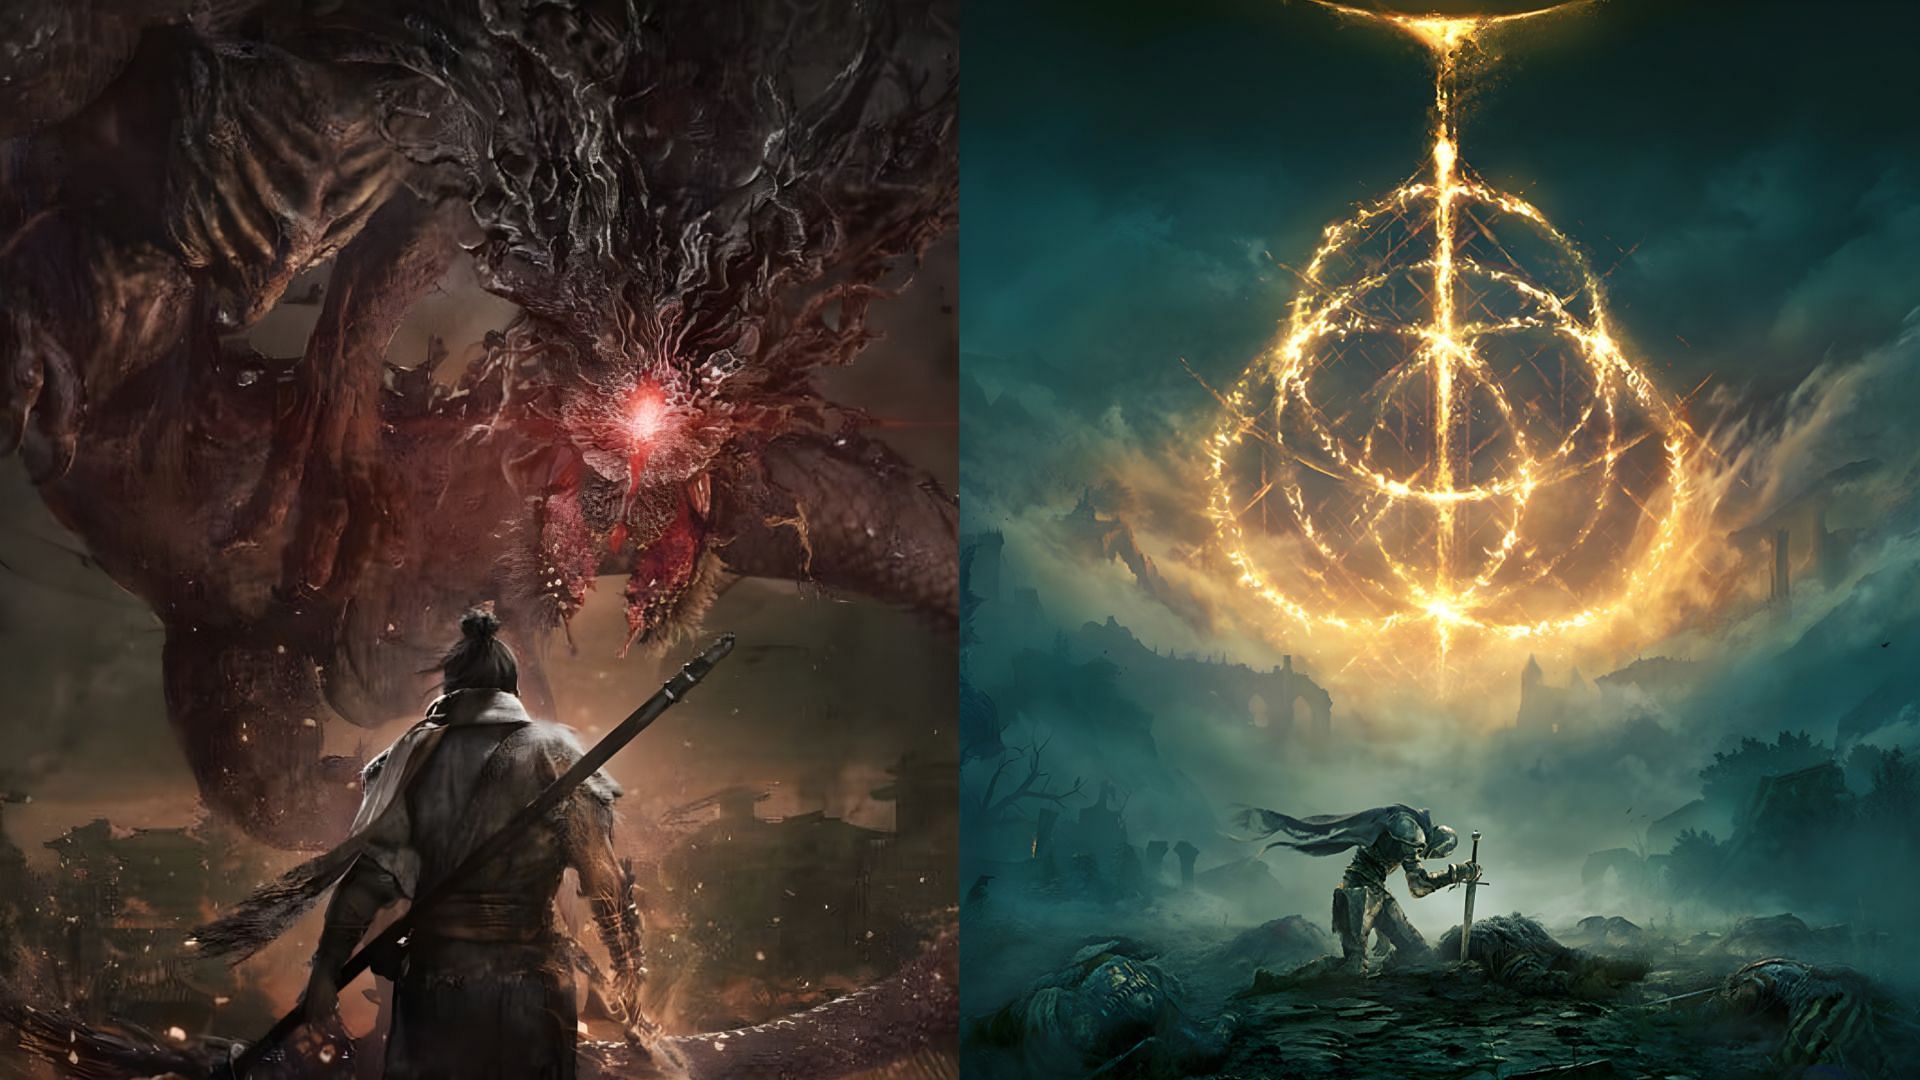 Wo Long: Fallen Dynasty vs Elden Ring: Which game offers a more difficult souls-like experience? (Image via Koei Tecmo, FromSoftware)